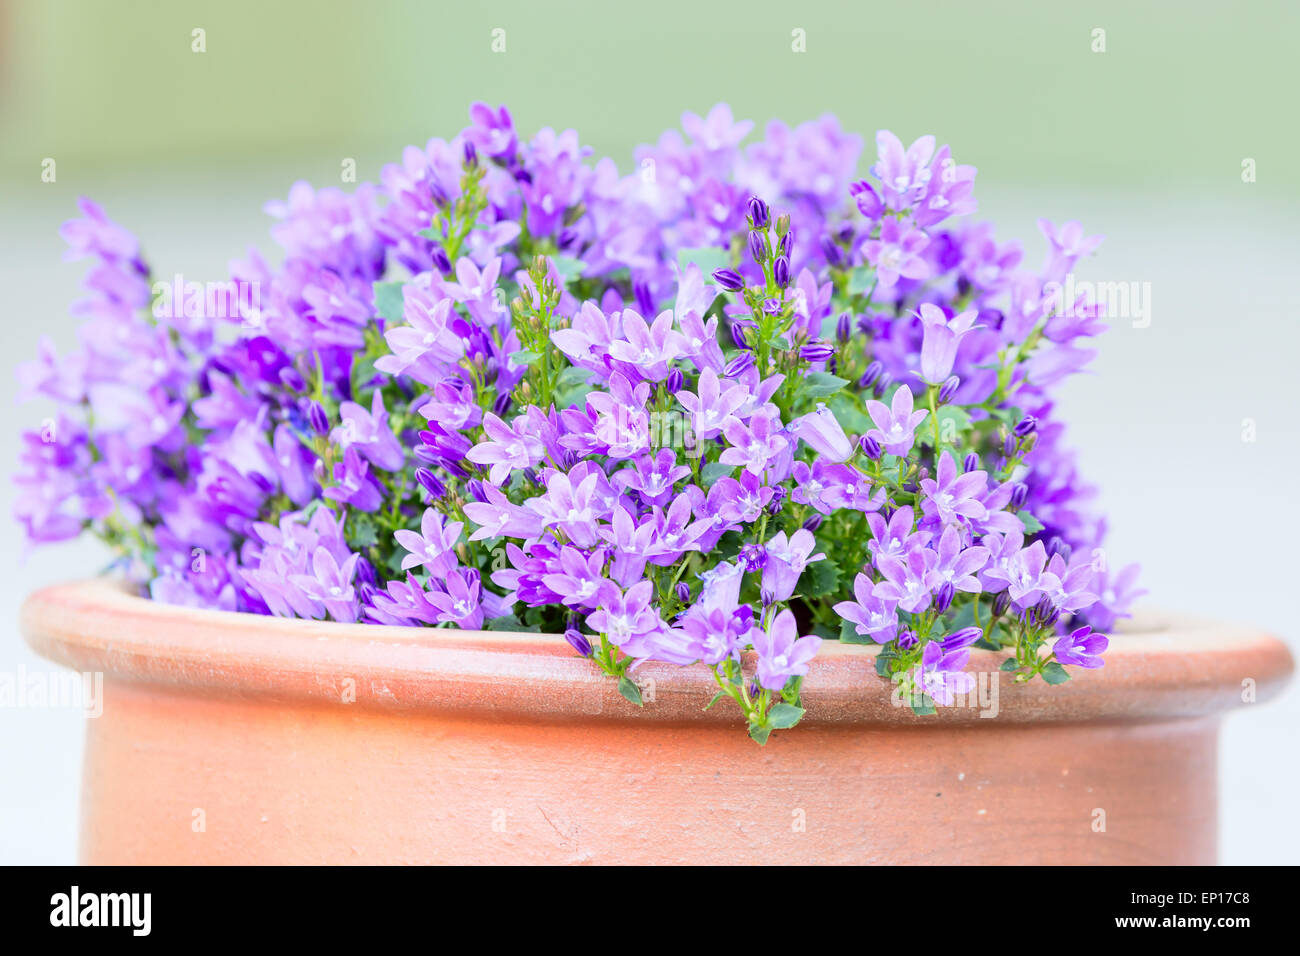 Small purple flowers planted in brown ceramic pots on stone stairs. These are some sort of bellflower (Campanula). Stock Photo